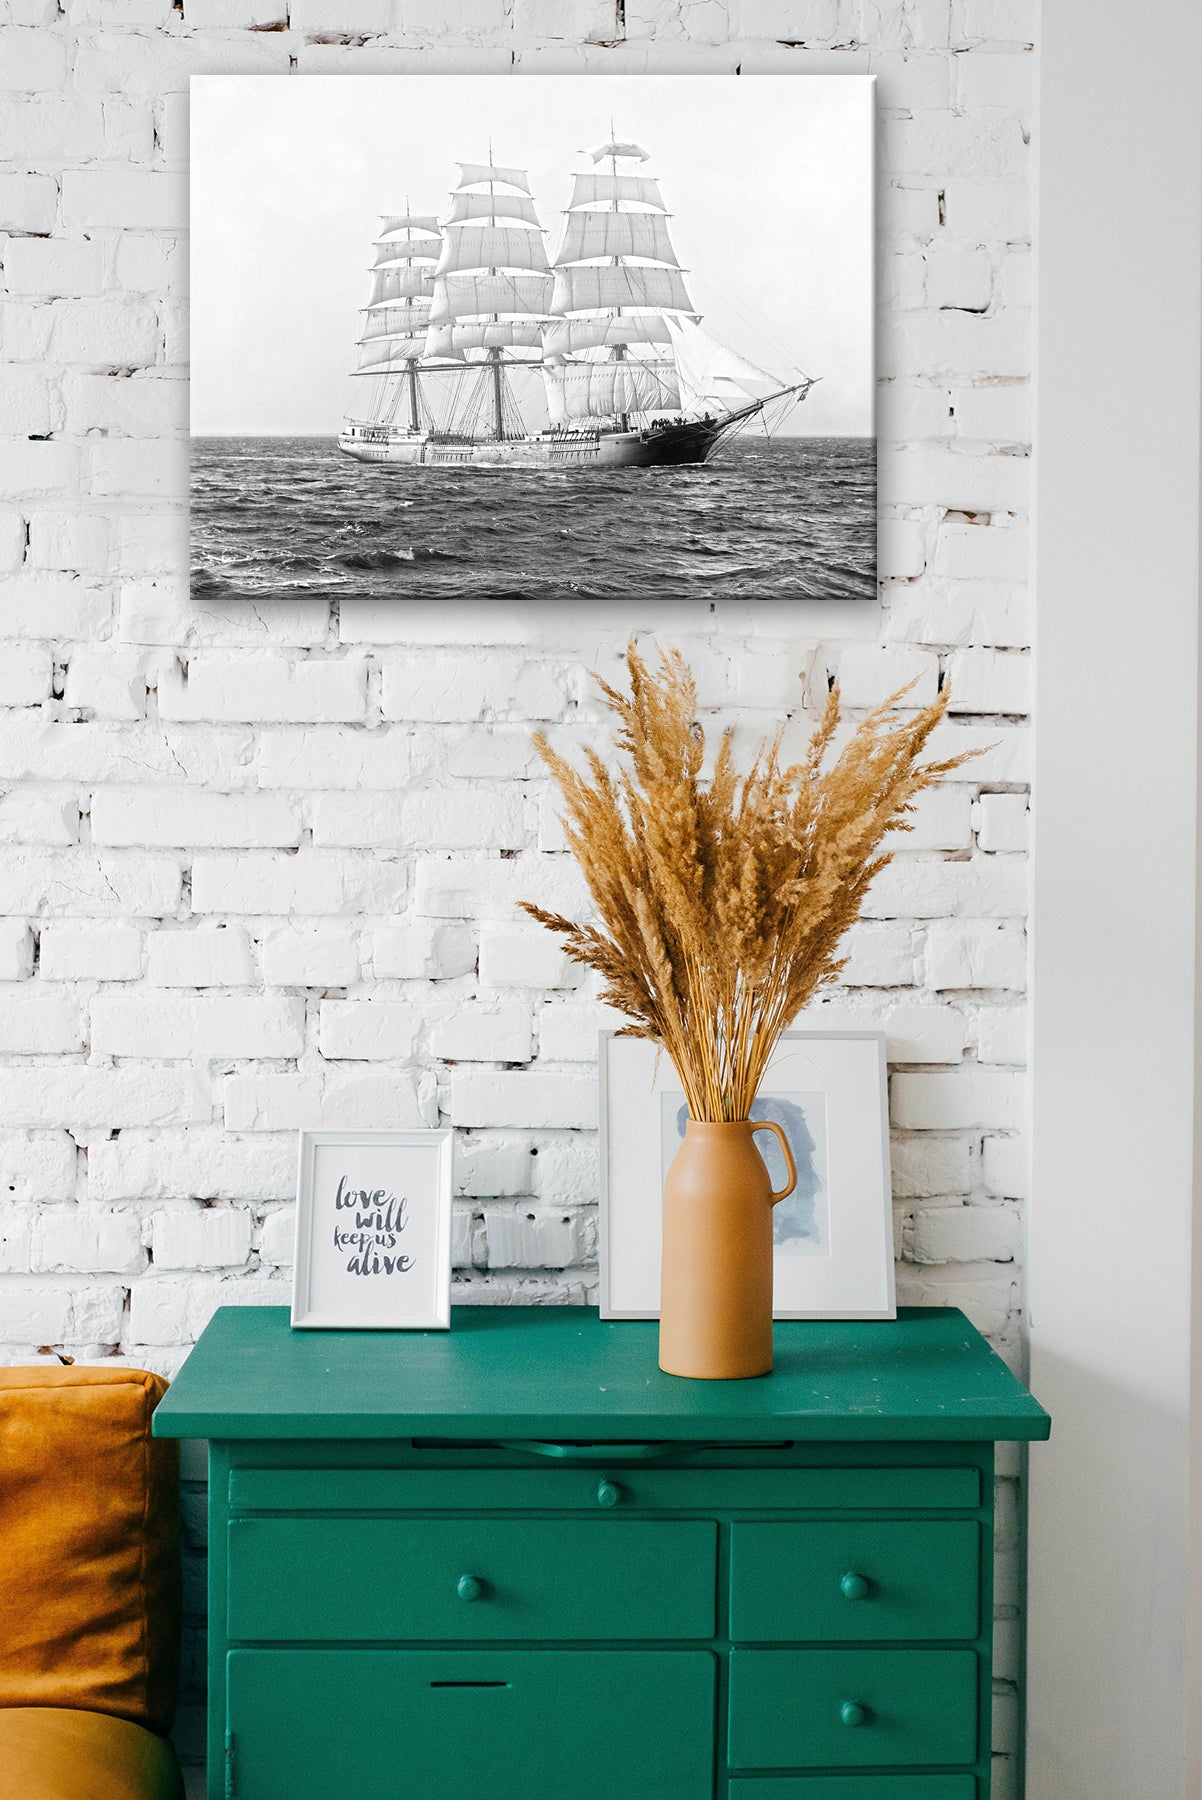 A room with a white brick wall and green storage table, featuring a canvas print hanging on the wall